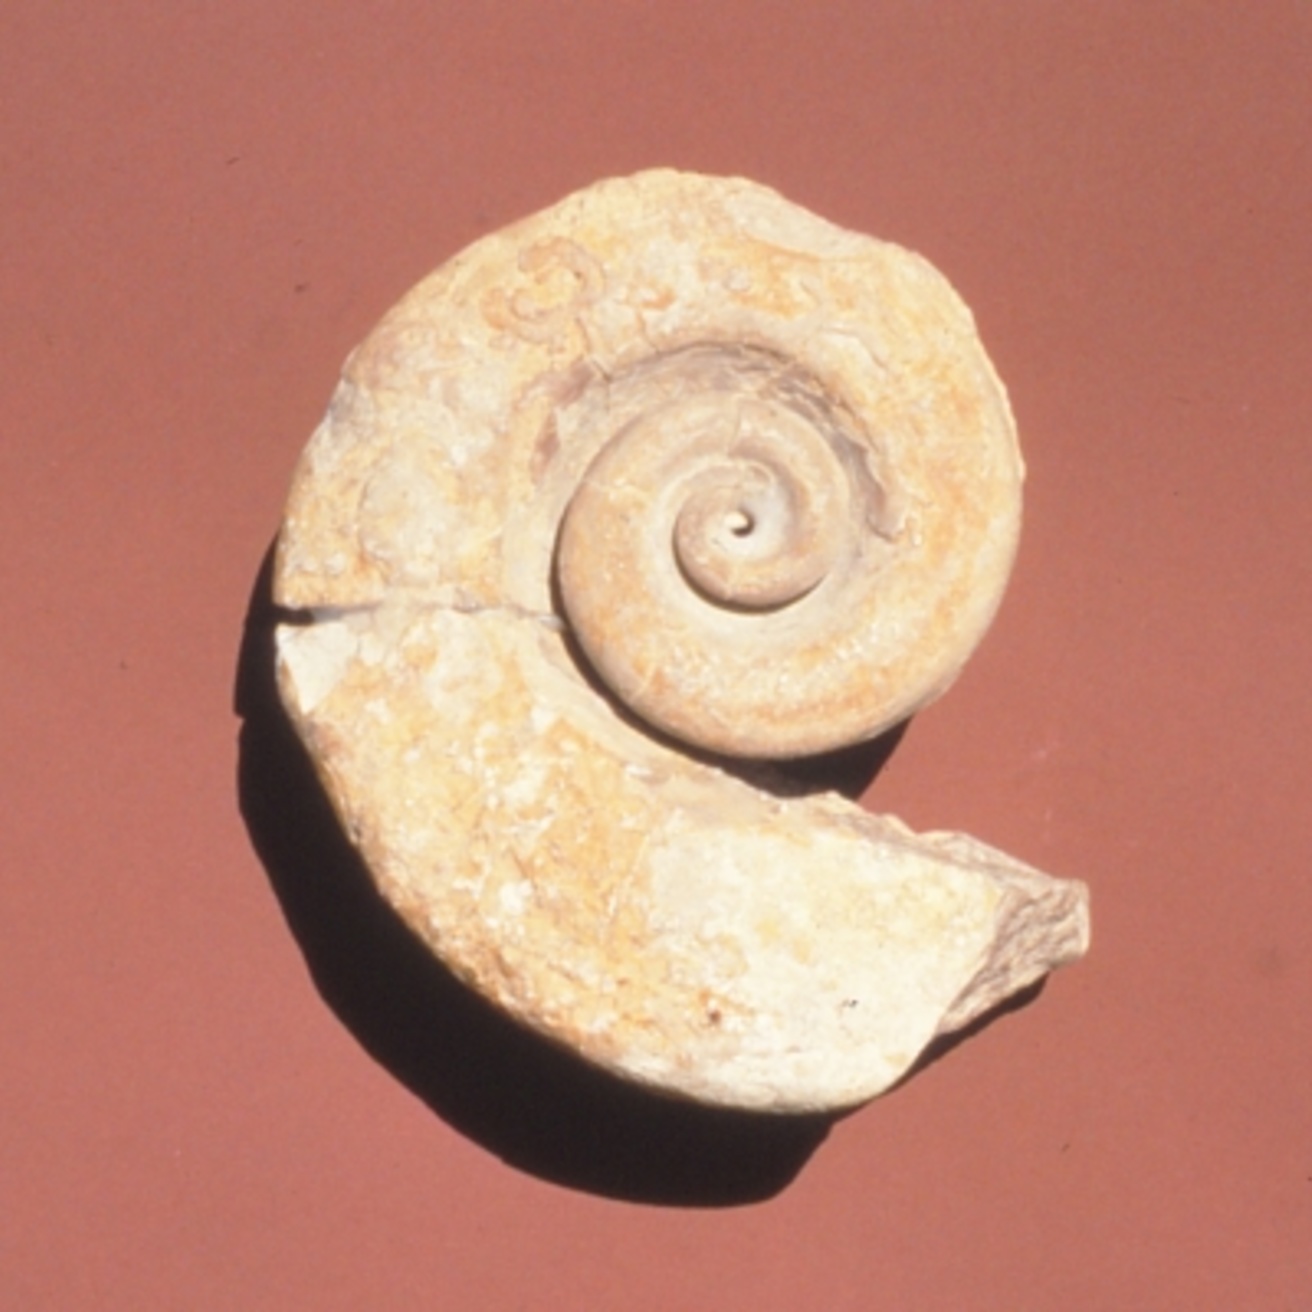 Photo of a gastropod fossil